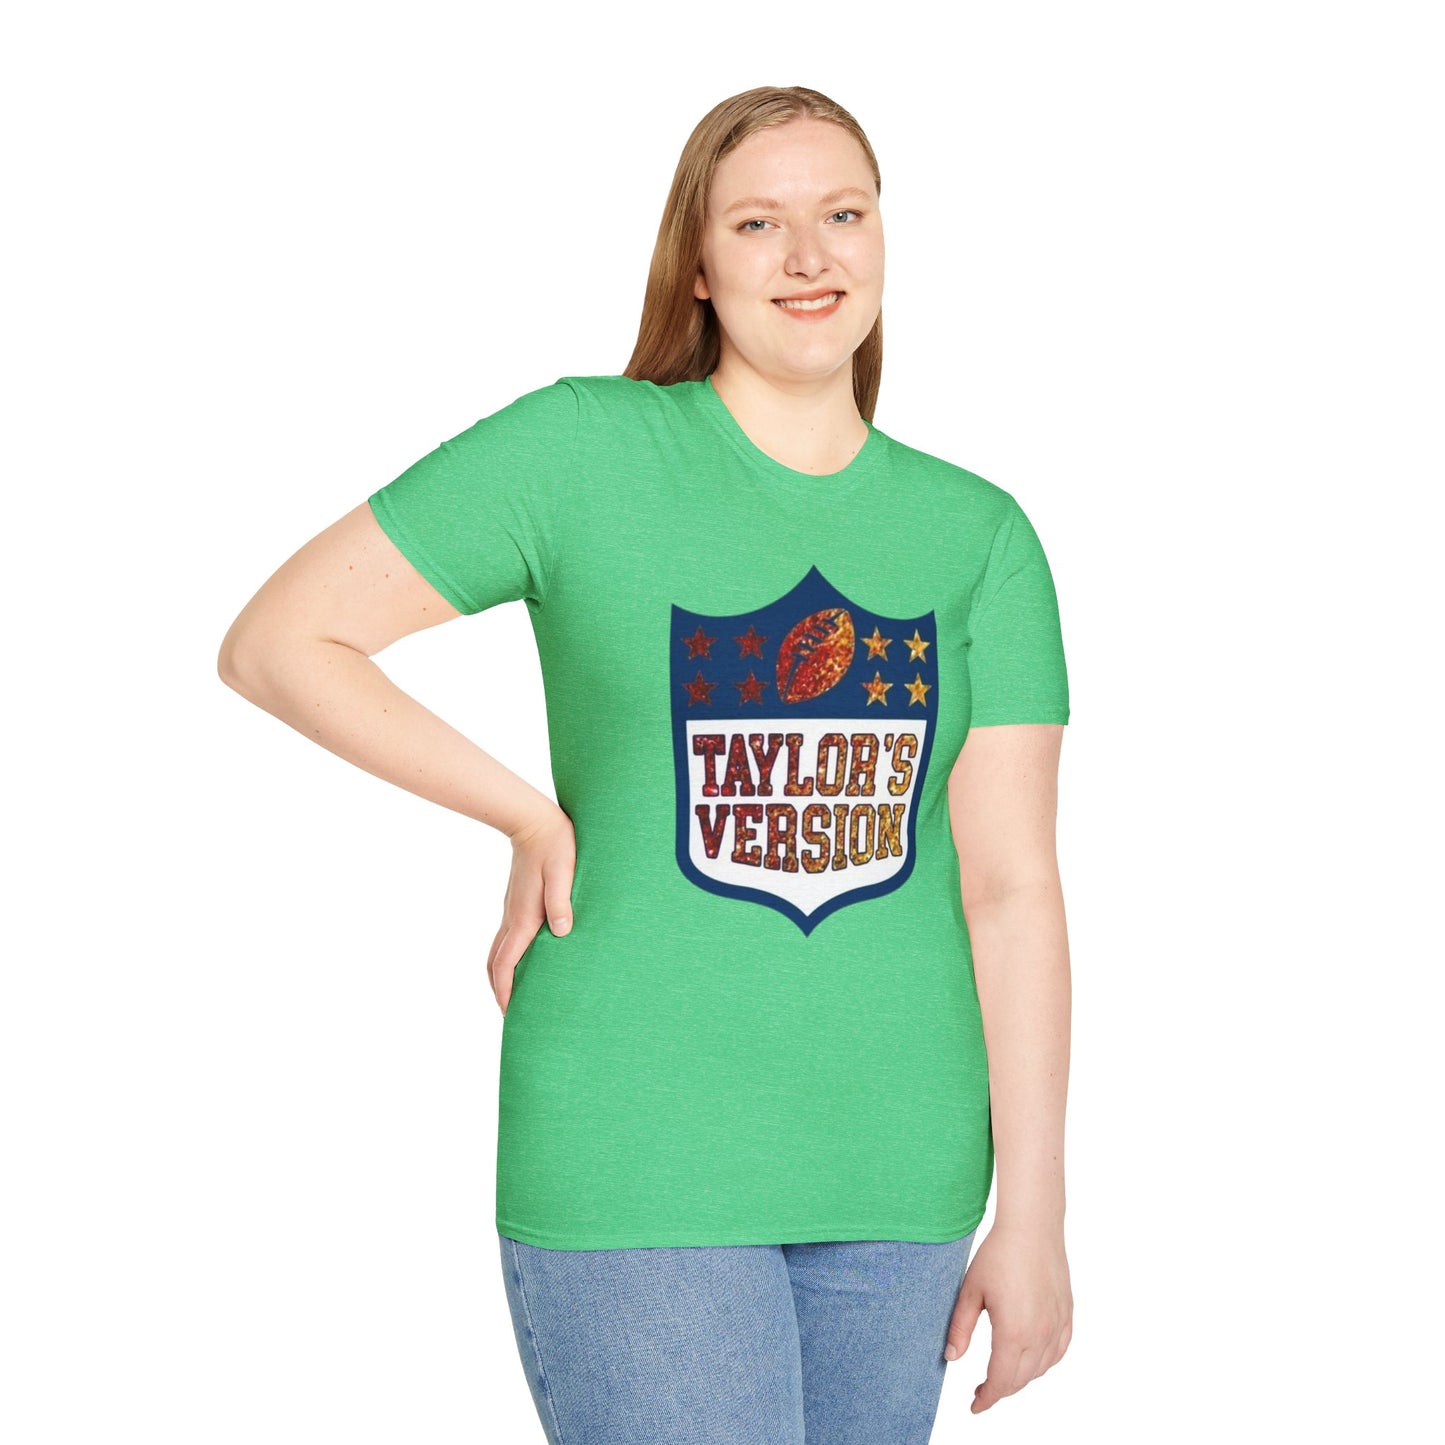 Taylor's Version - Unisex Softstyle T-Shirt